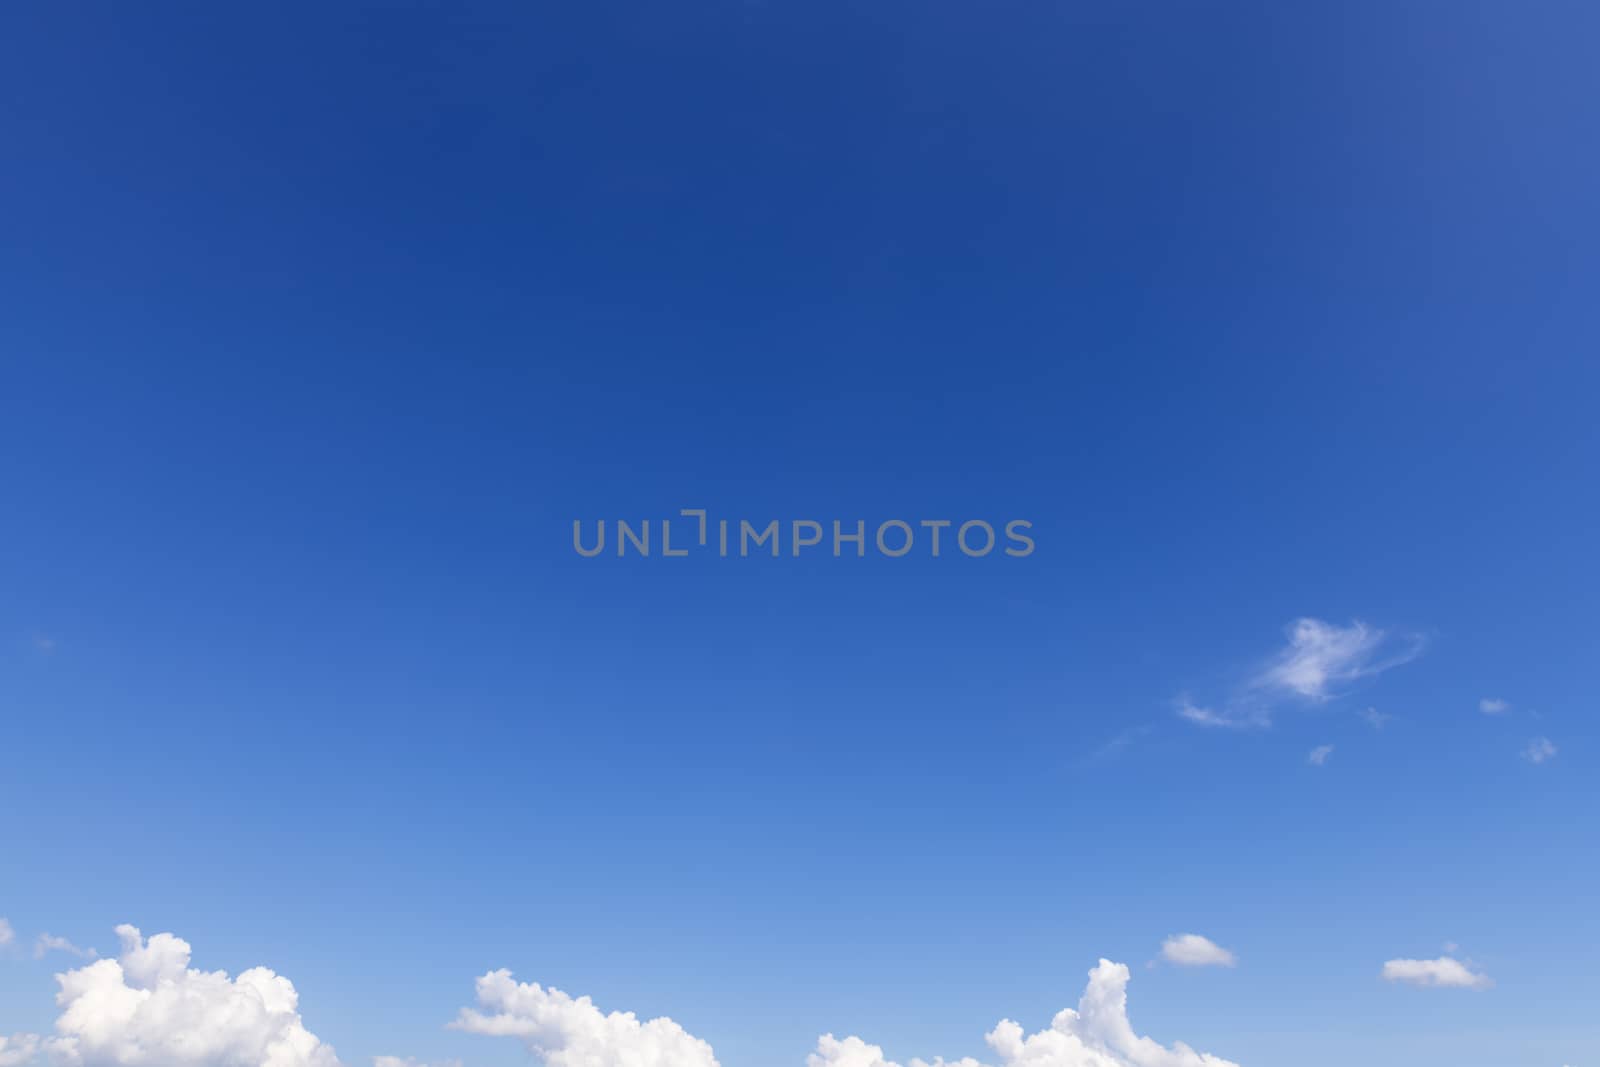 Summer blue sky with soft white clouds background.